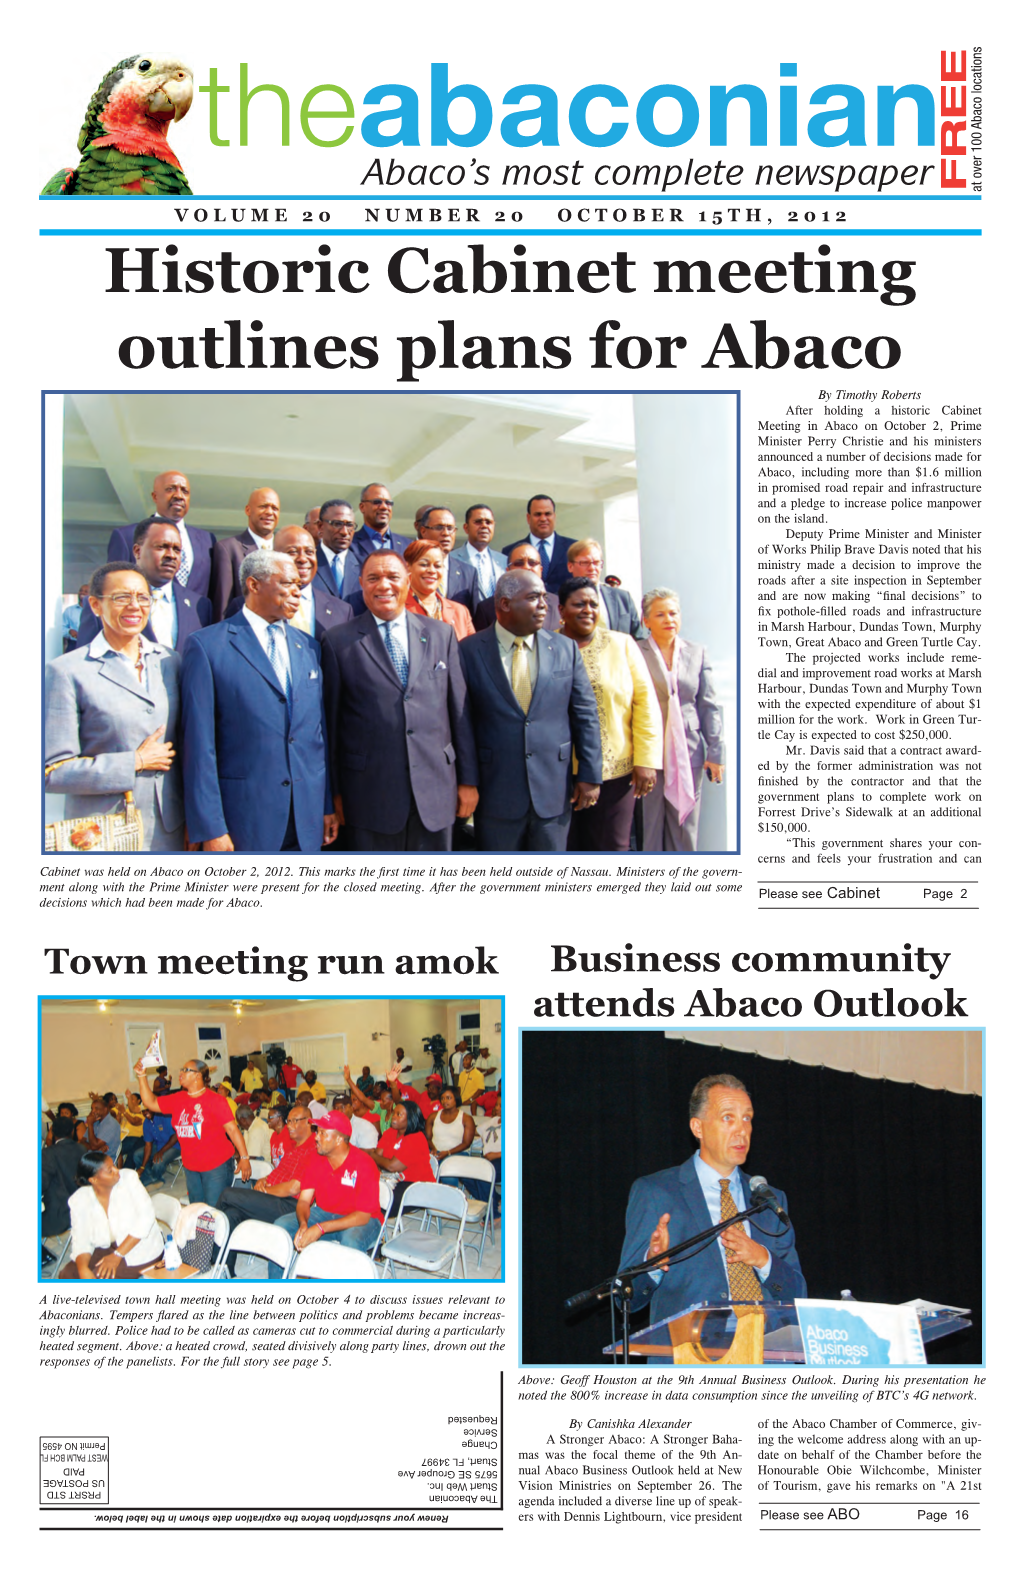 Historic Cabinet Meeting Outlines Plans for Abaco